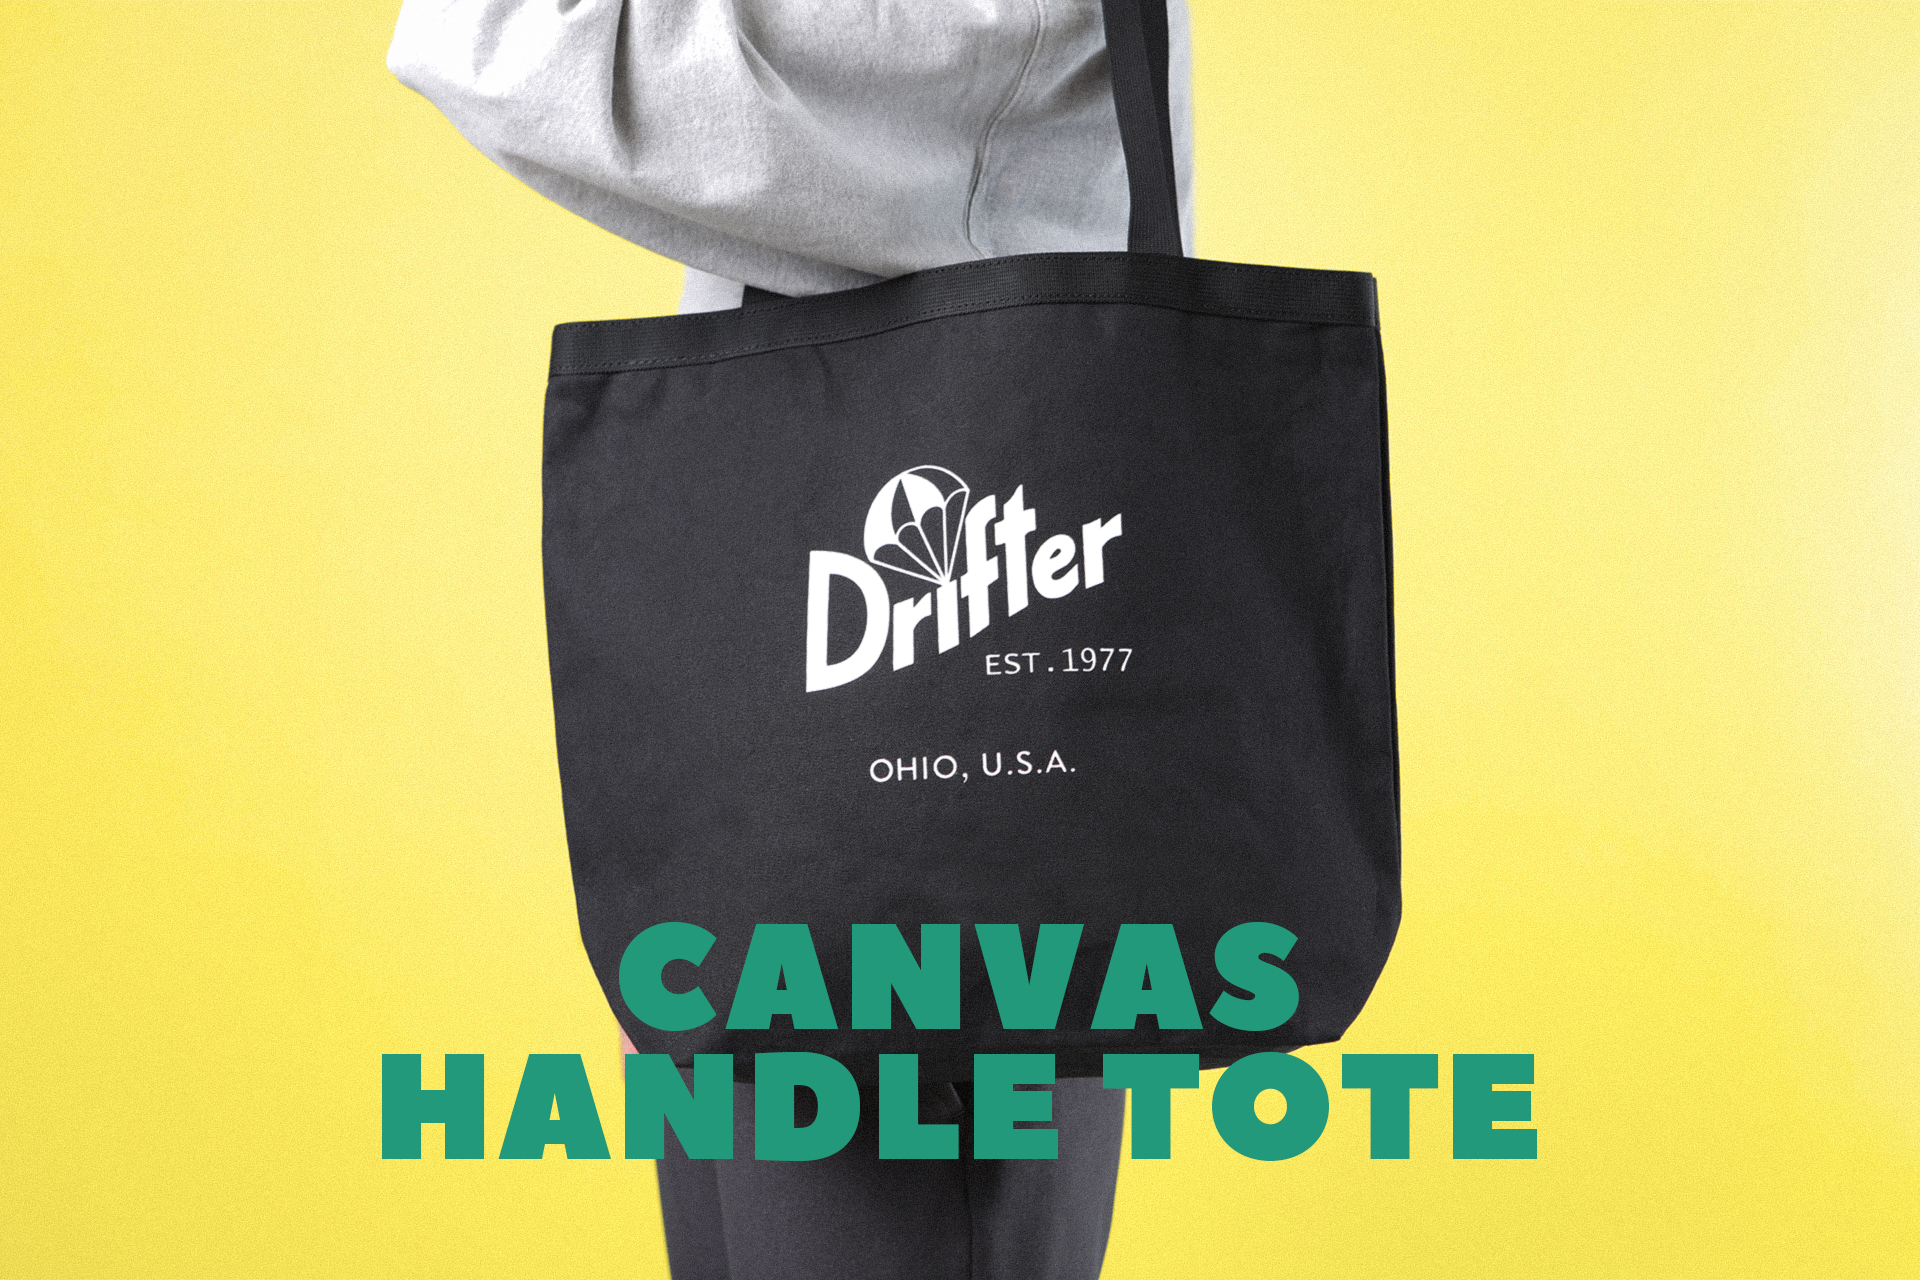 drifter-23ss-canvas-handle-tote